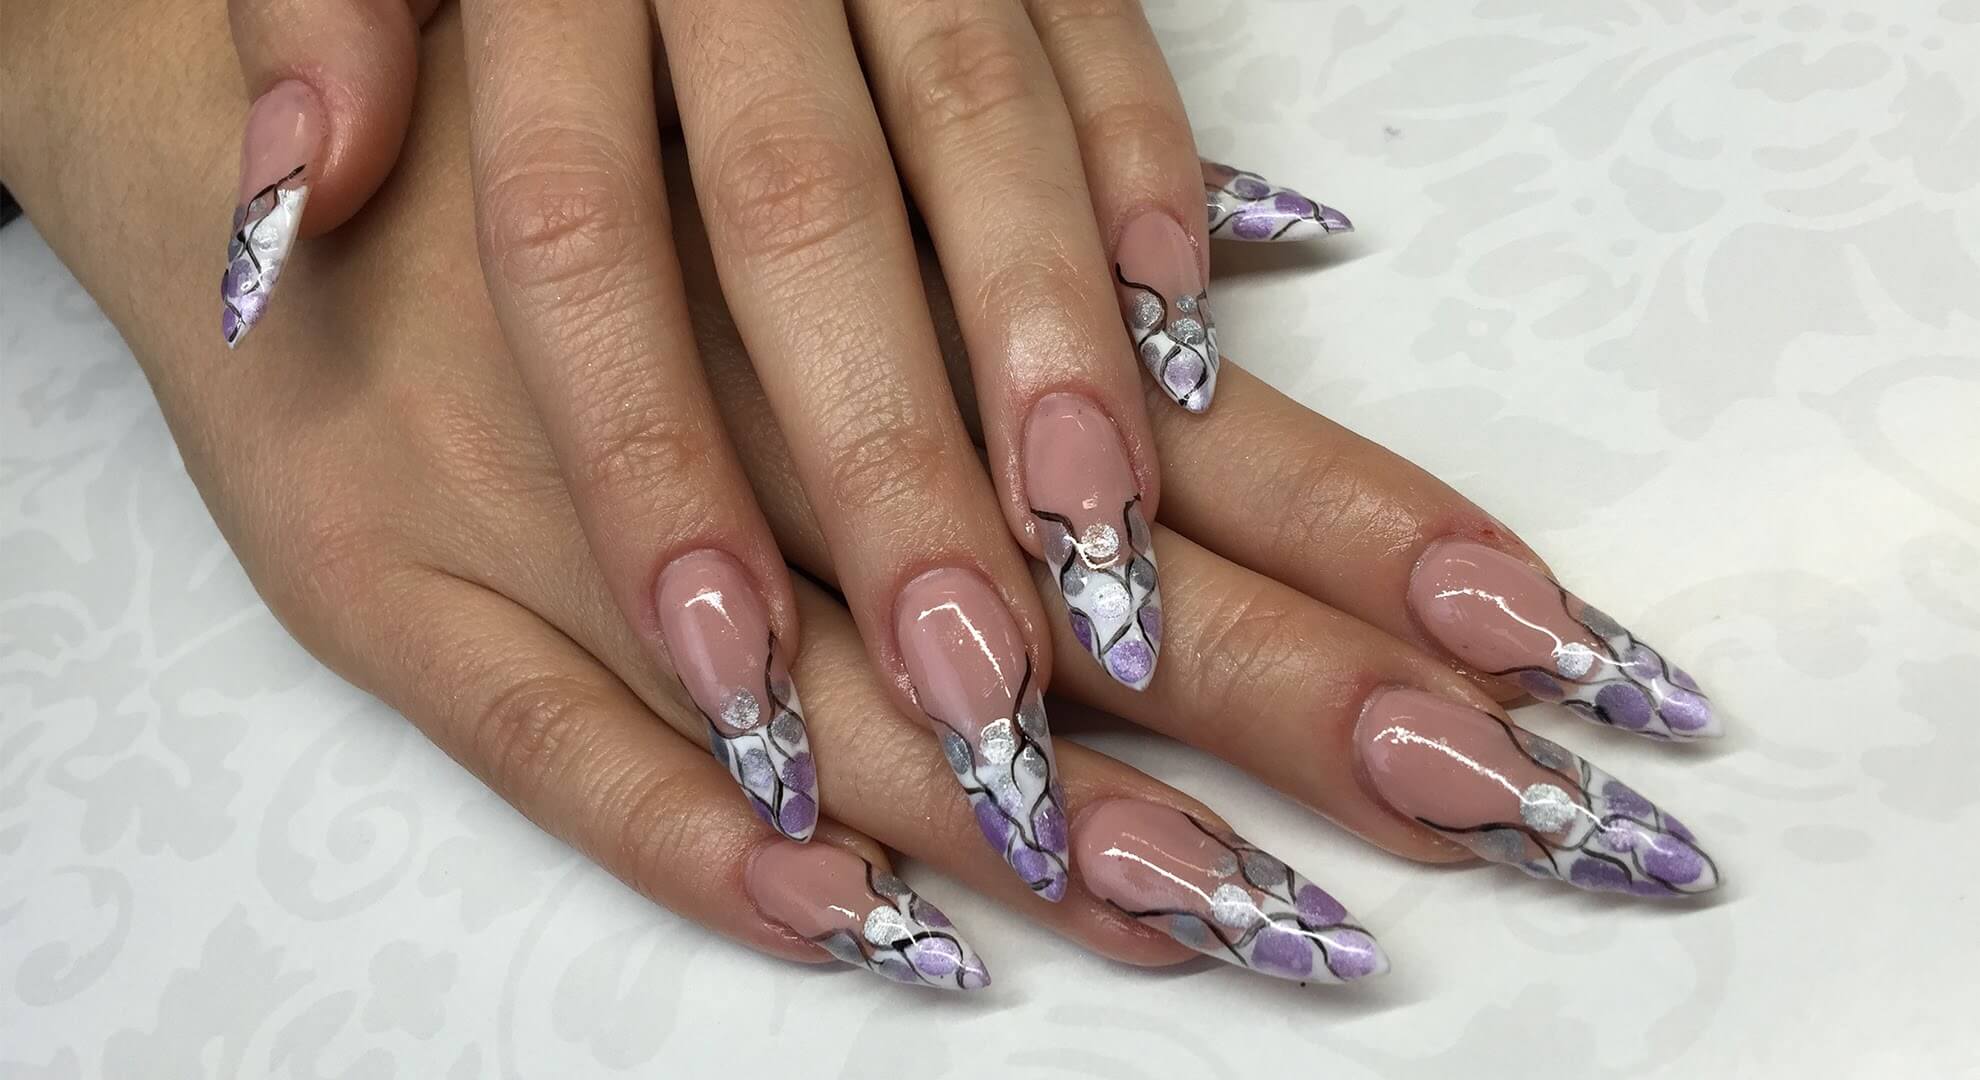 Professional Cheer Nail Designs - wide 7